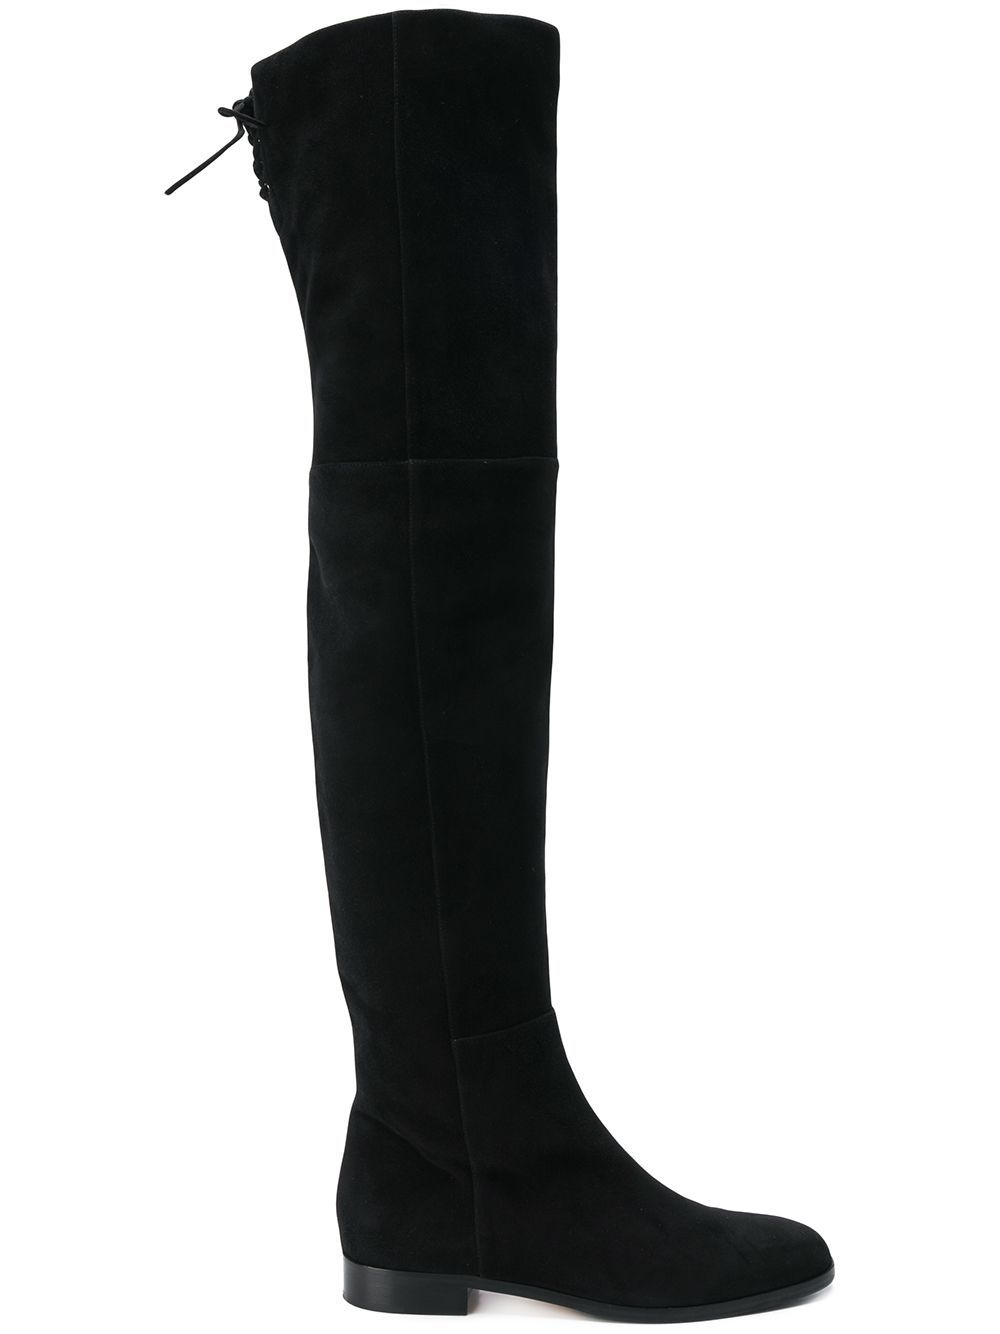 Sergio Rossi flat over the knee boots - Black | FarFetch US